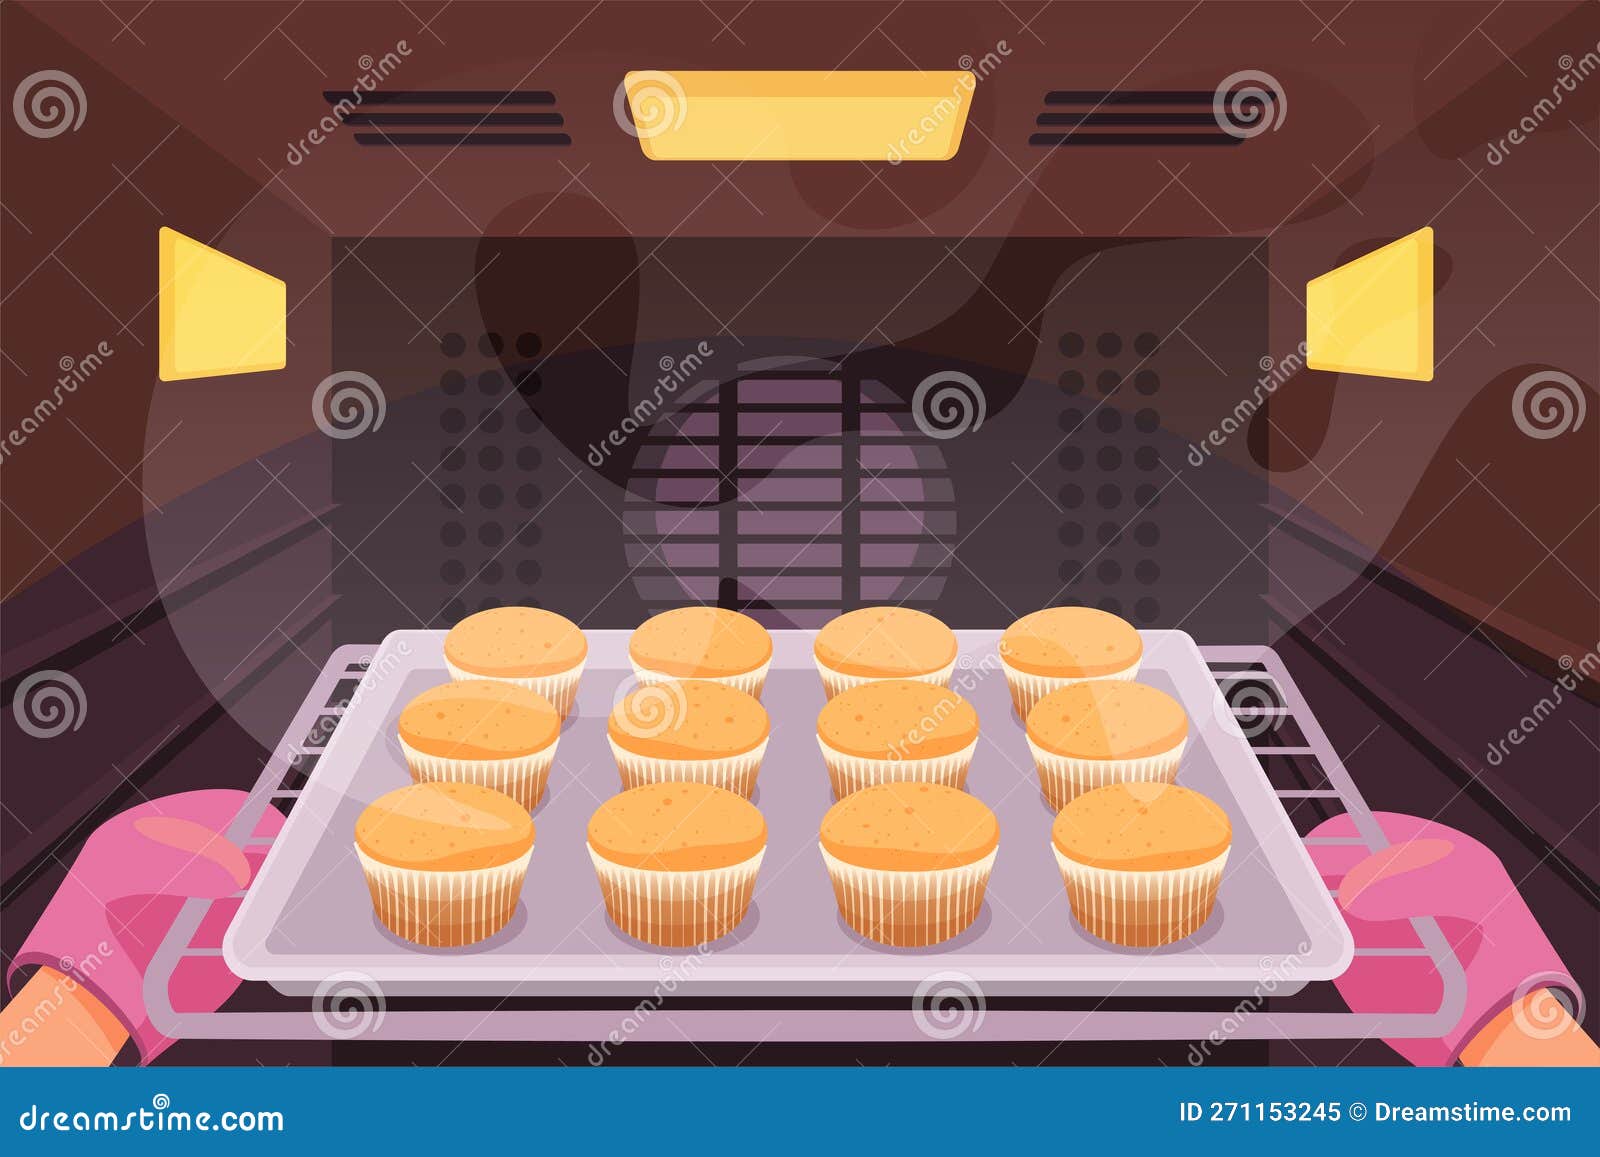 https://thumbs.dreamstime.com/z/hands-baker-kitchen-mitts-taking-out-tray-cakes-baking-oven-cartoon-chefs-pink-protective-gloves-holding-hot-pan-271153245.jpg